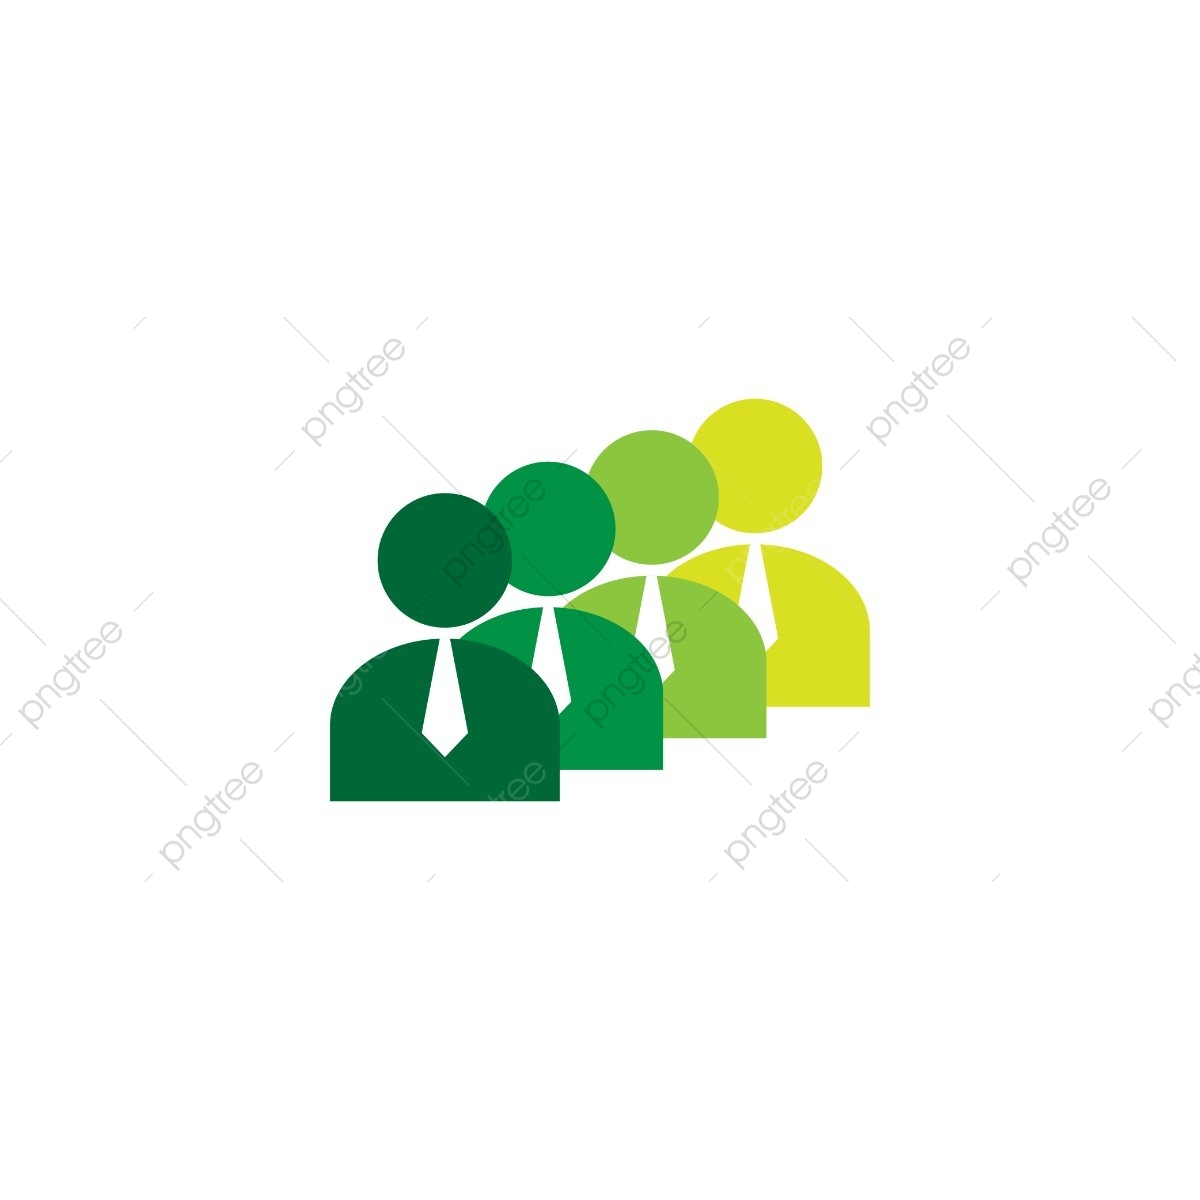 pngtree-employee-logo-and-icon-graphic-template-png-image_3555579.jpg